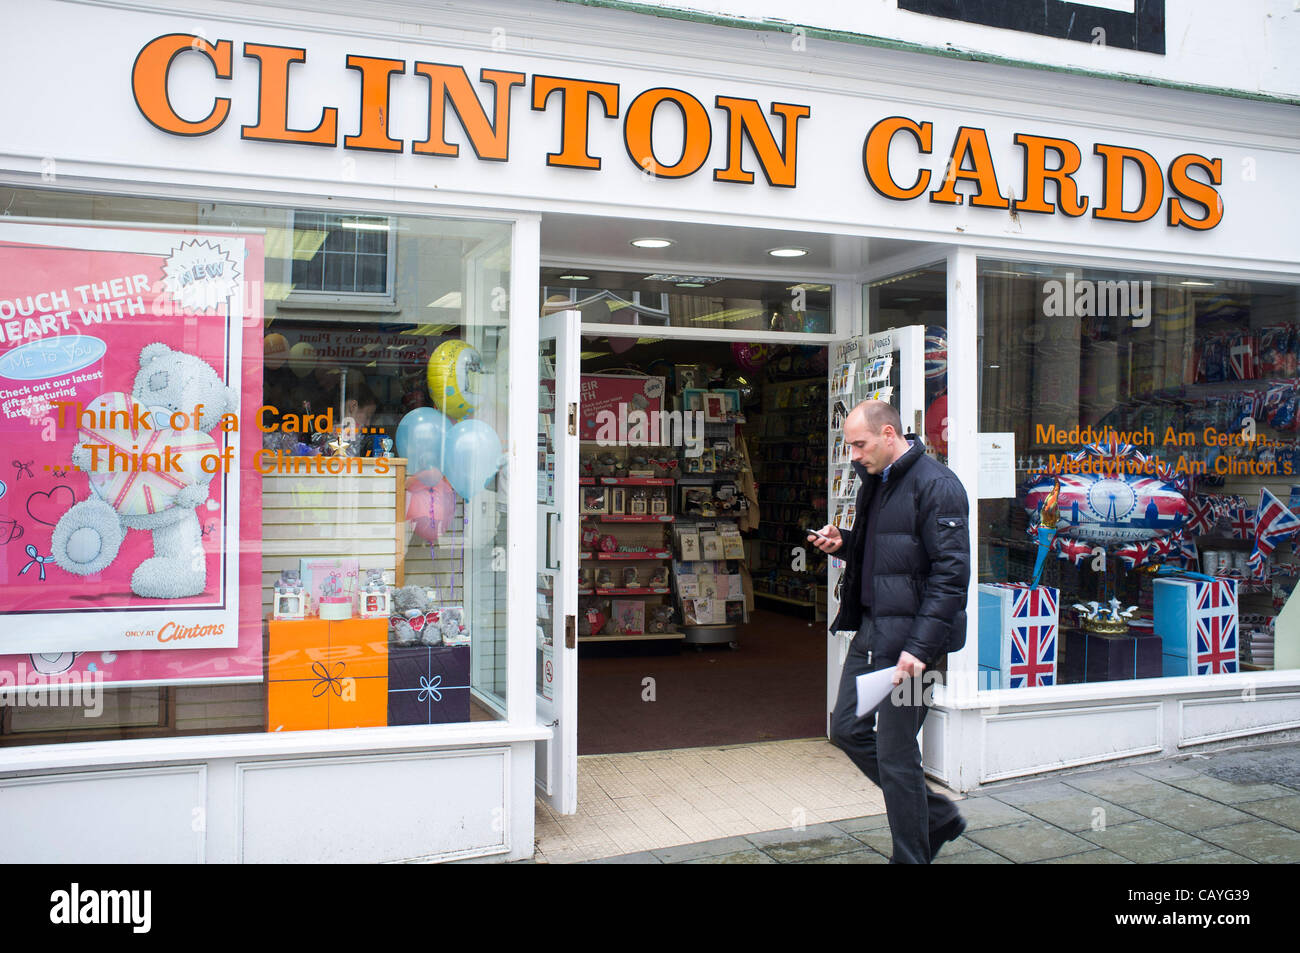 Wed 9 May 2012: A branch of the UK high street retail company Clinton Cards. The company, which employs over 8000 people in its 139 Birthdays and 628 Clintons Cards stores,  is in financial difficulties and is expected to go into administration later in the day. Stock Photo